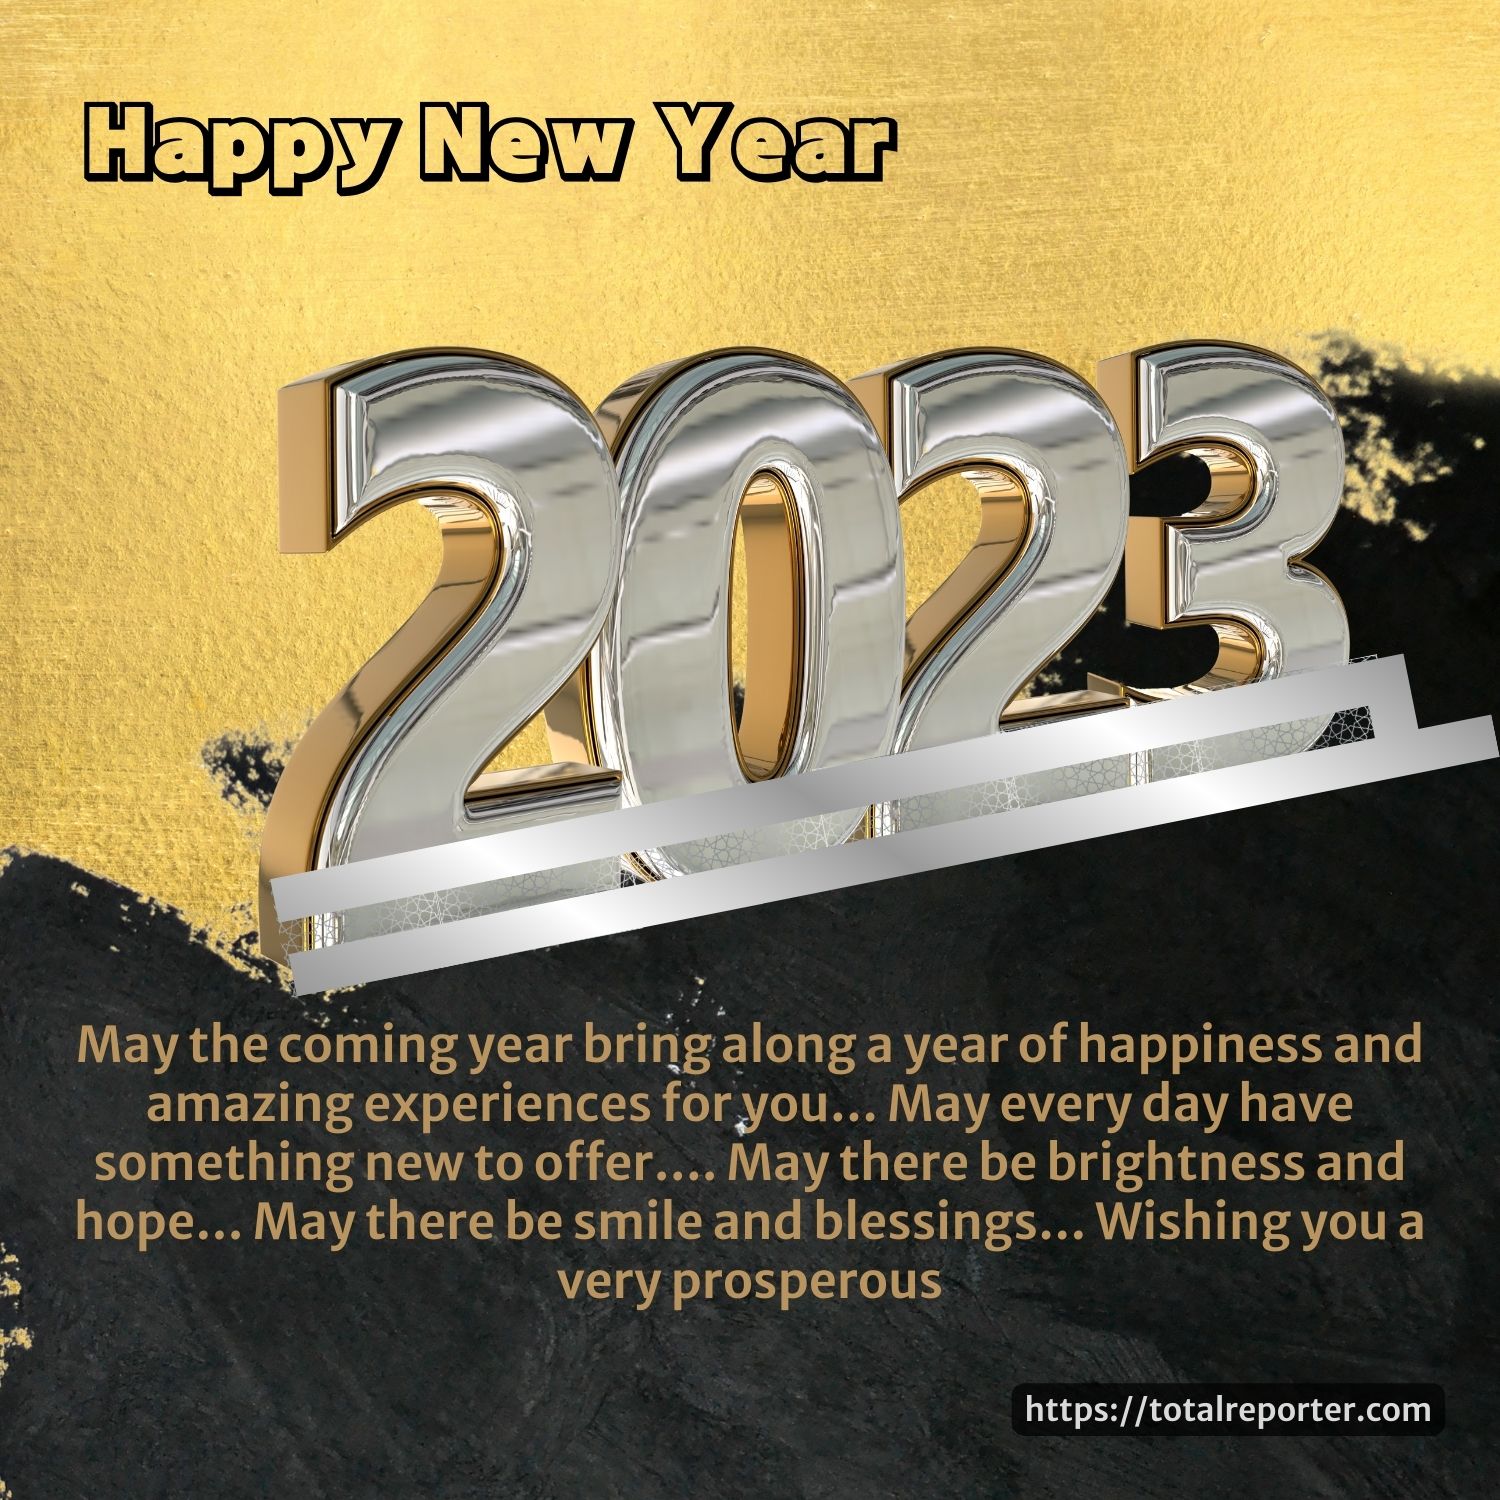 Happy New Year wishes pictures